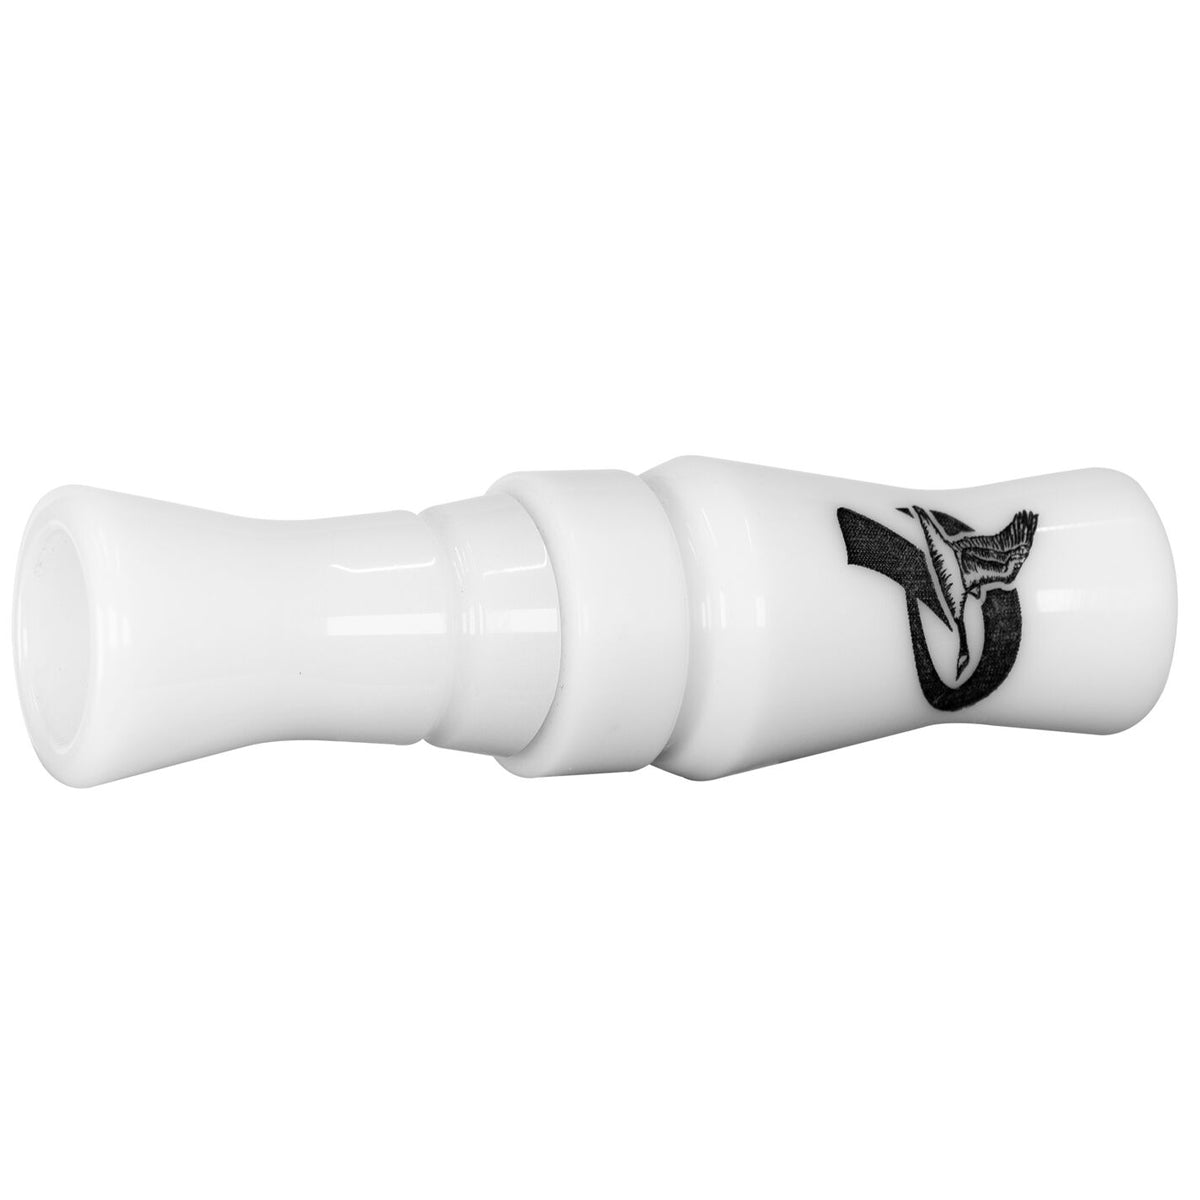 Phelps PG CROSSOVER PRO GOOSE CALL in  by GOHUNT | Phelps Game Calls - GOHUNT Shop